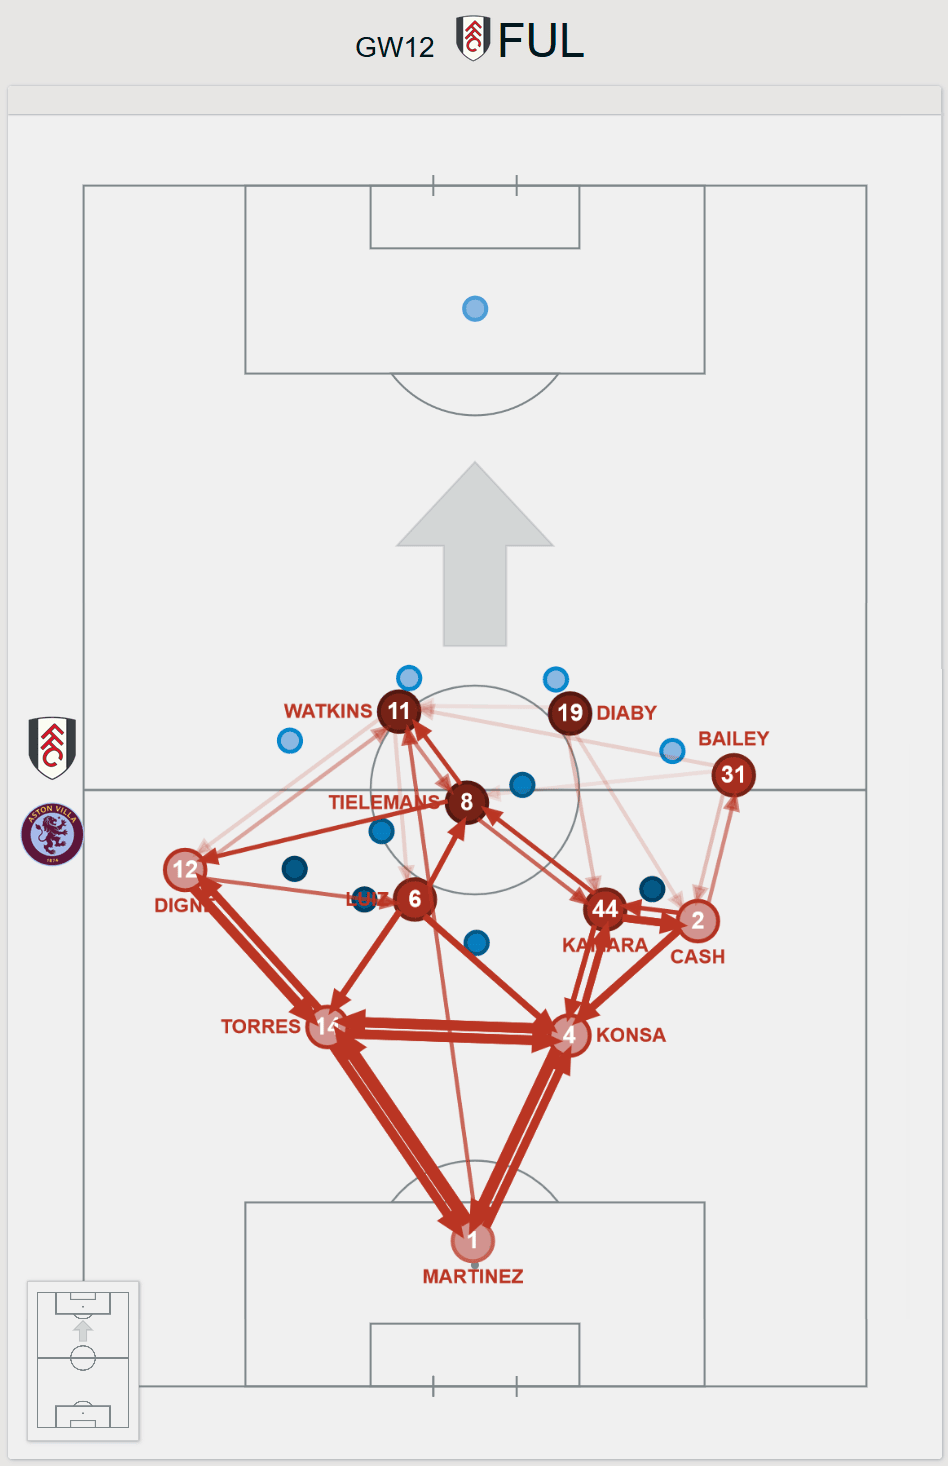 Aston Villa team shape and pass patterns vs Fulham in GW12